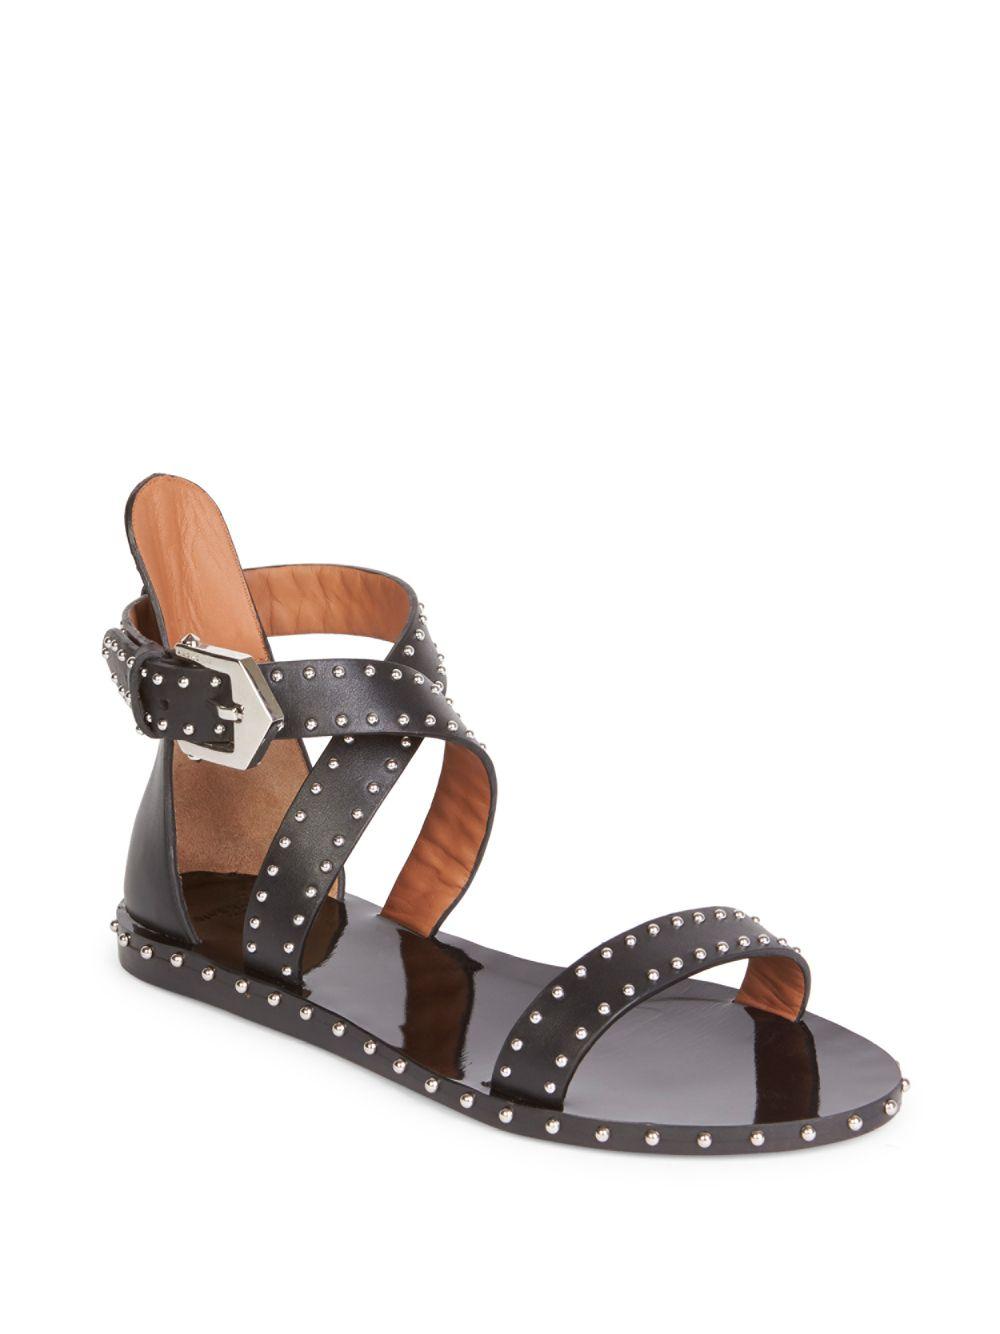 Givenchy Studded Leather Sandals in Black | Lyst